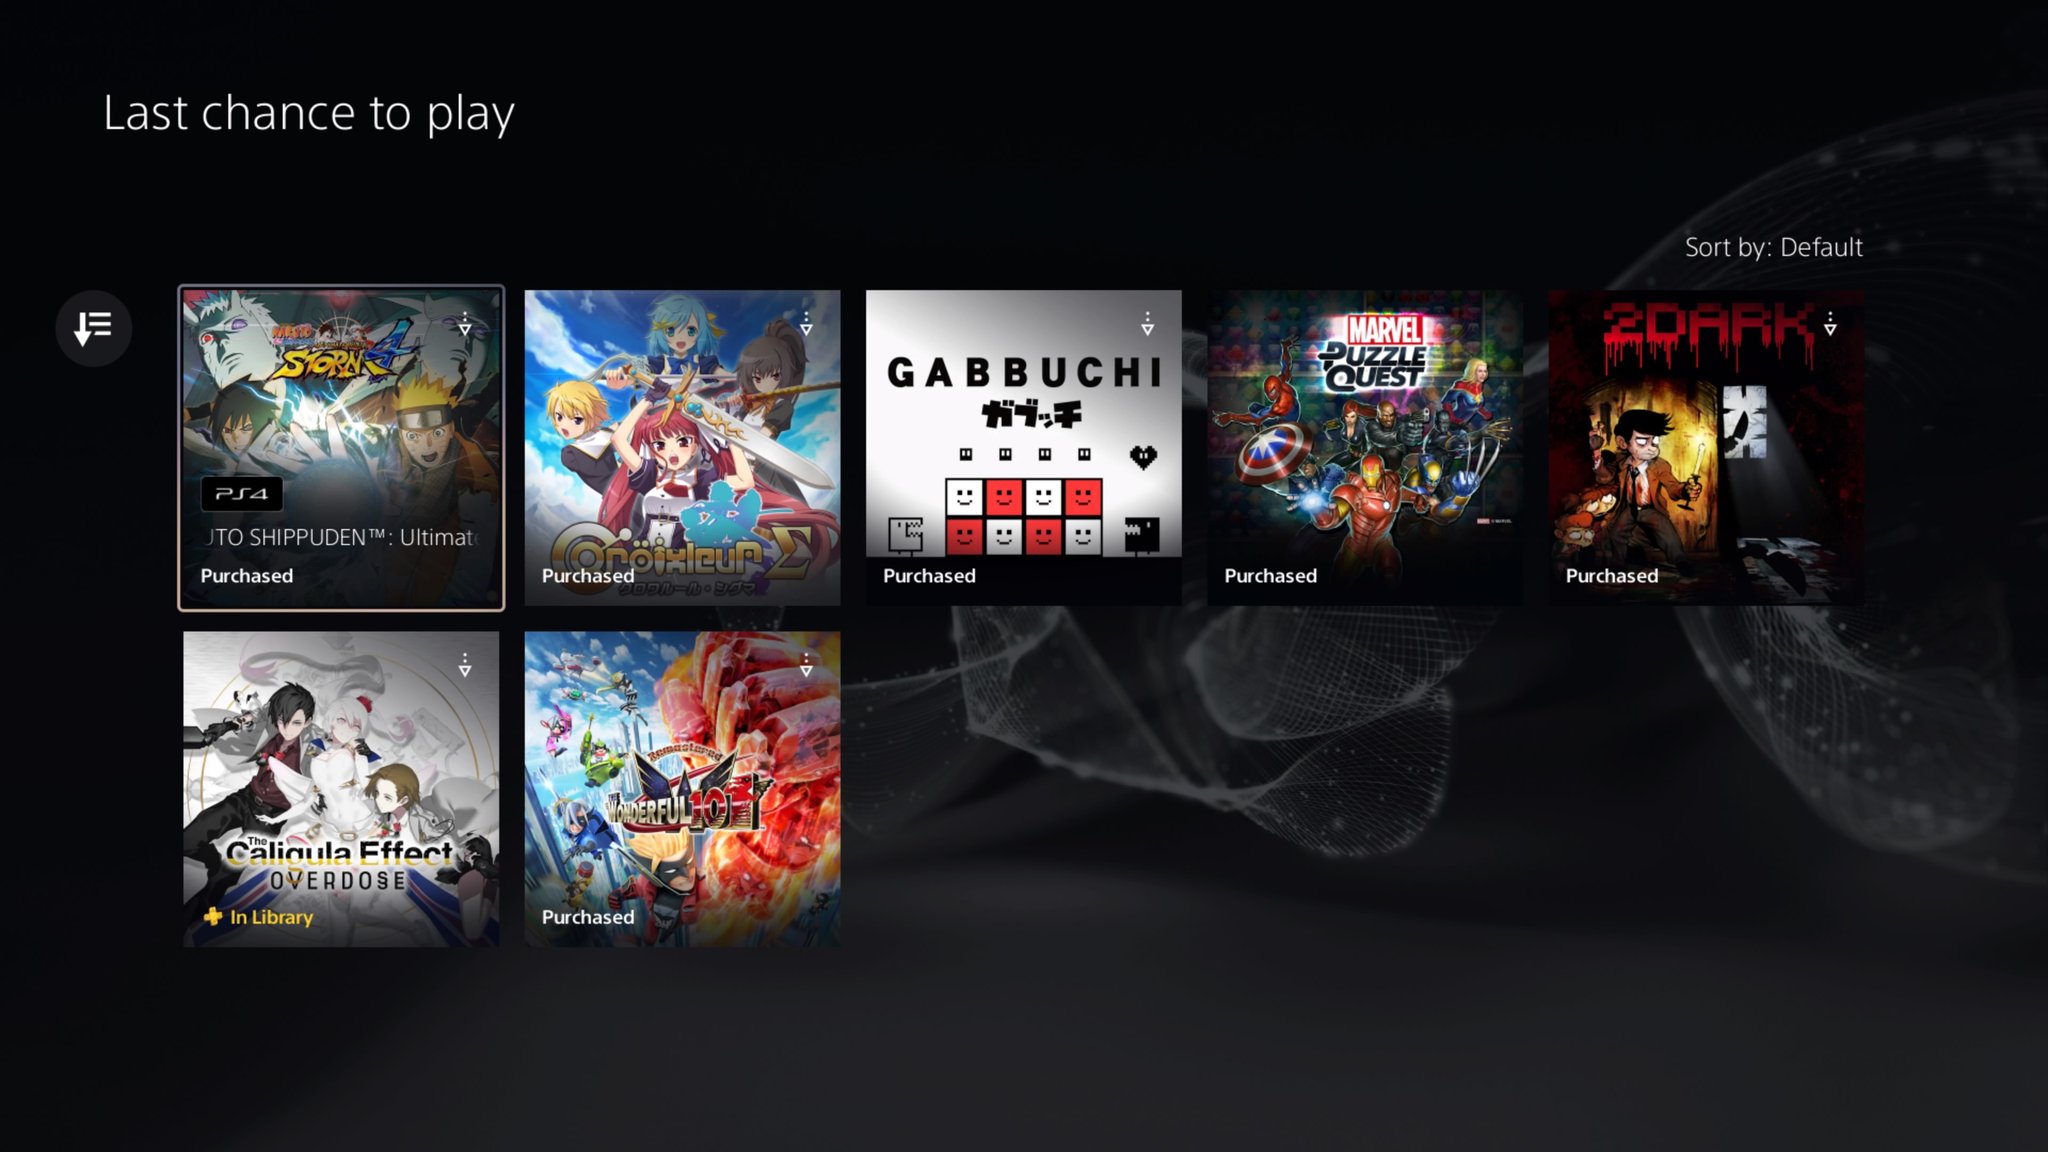 PS Plus April 2023 Extra/Premium Game Catalog is now available in